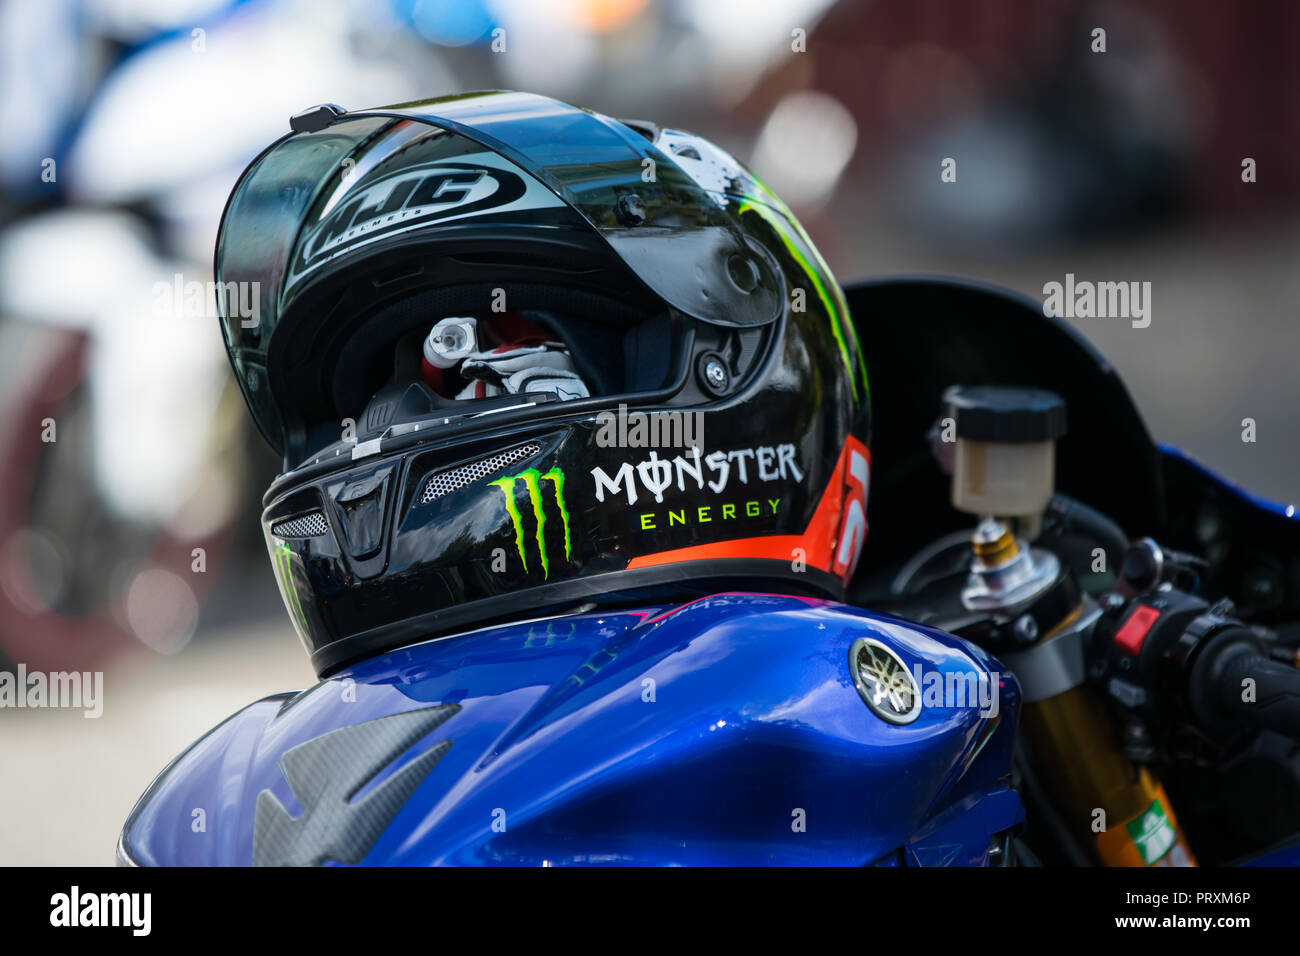 view of the Yamaha r1 motorcycle tank and HJC helm lying on it with the Monster Energy advertisement Stock Photo